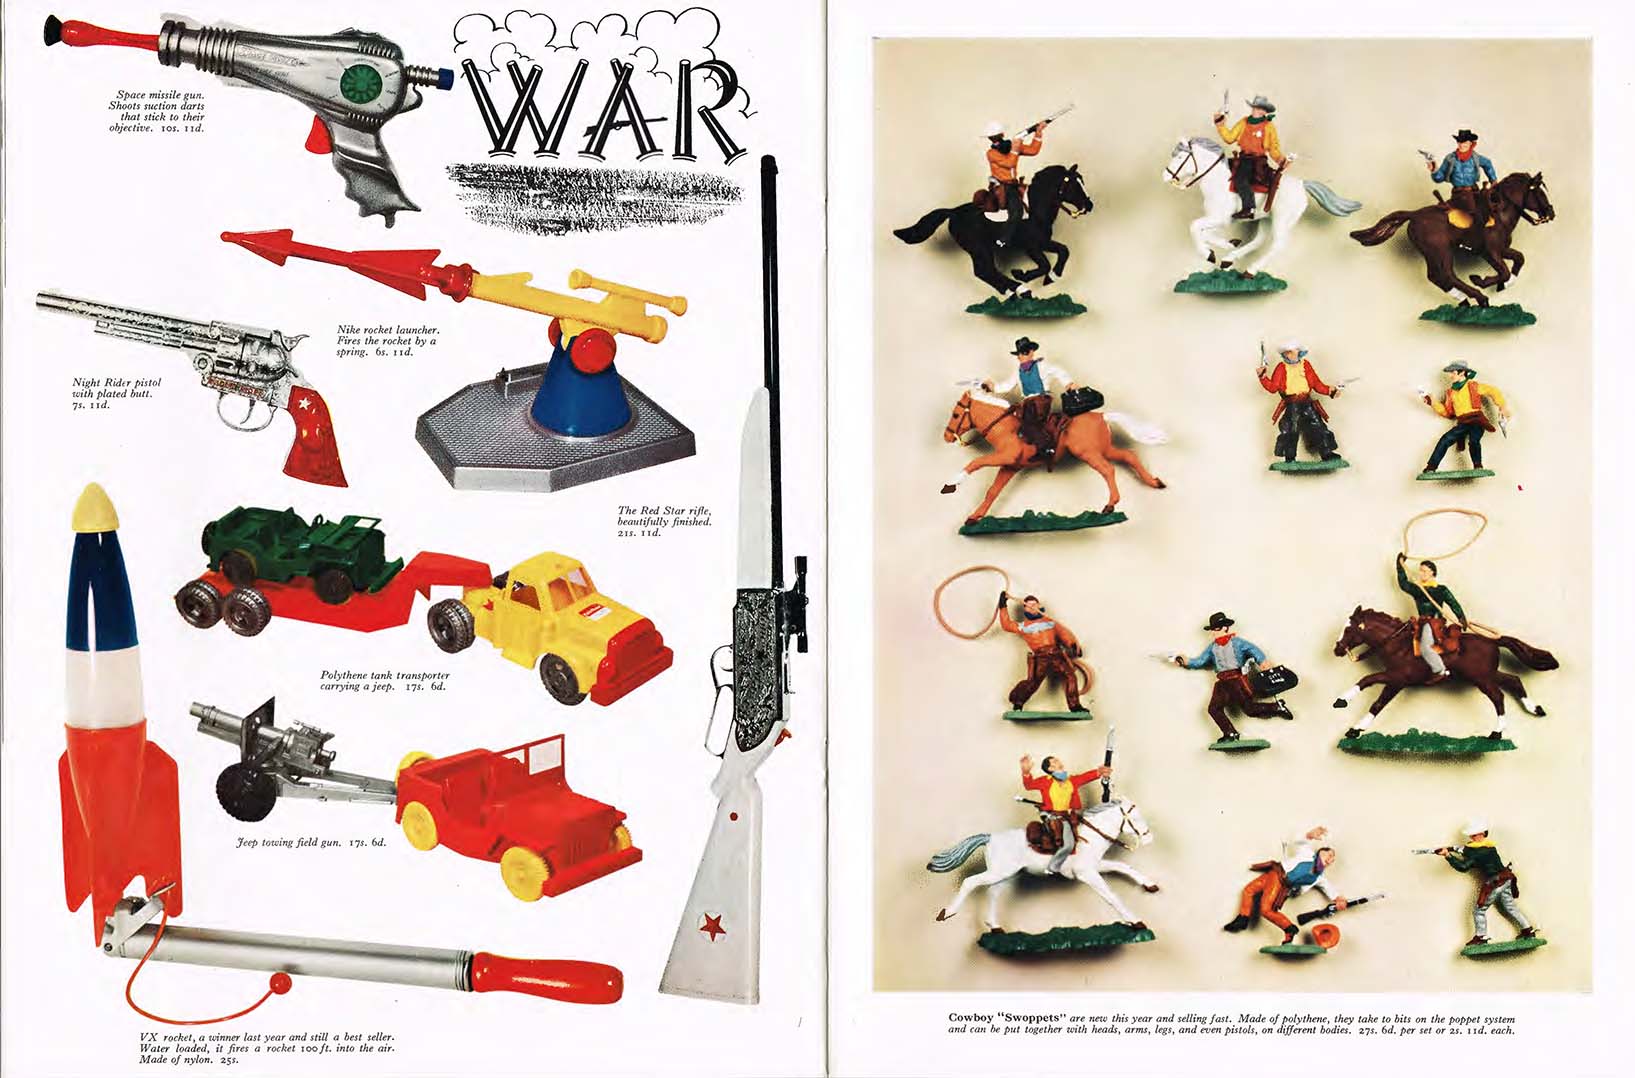 Plastic toy guns, cars, and figurines of men on horseback with lassos